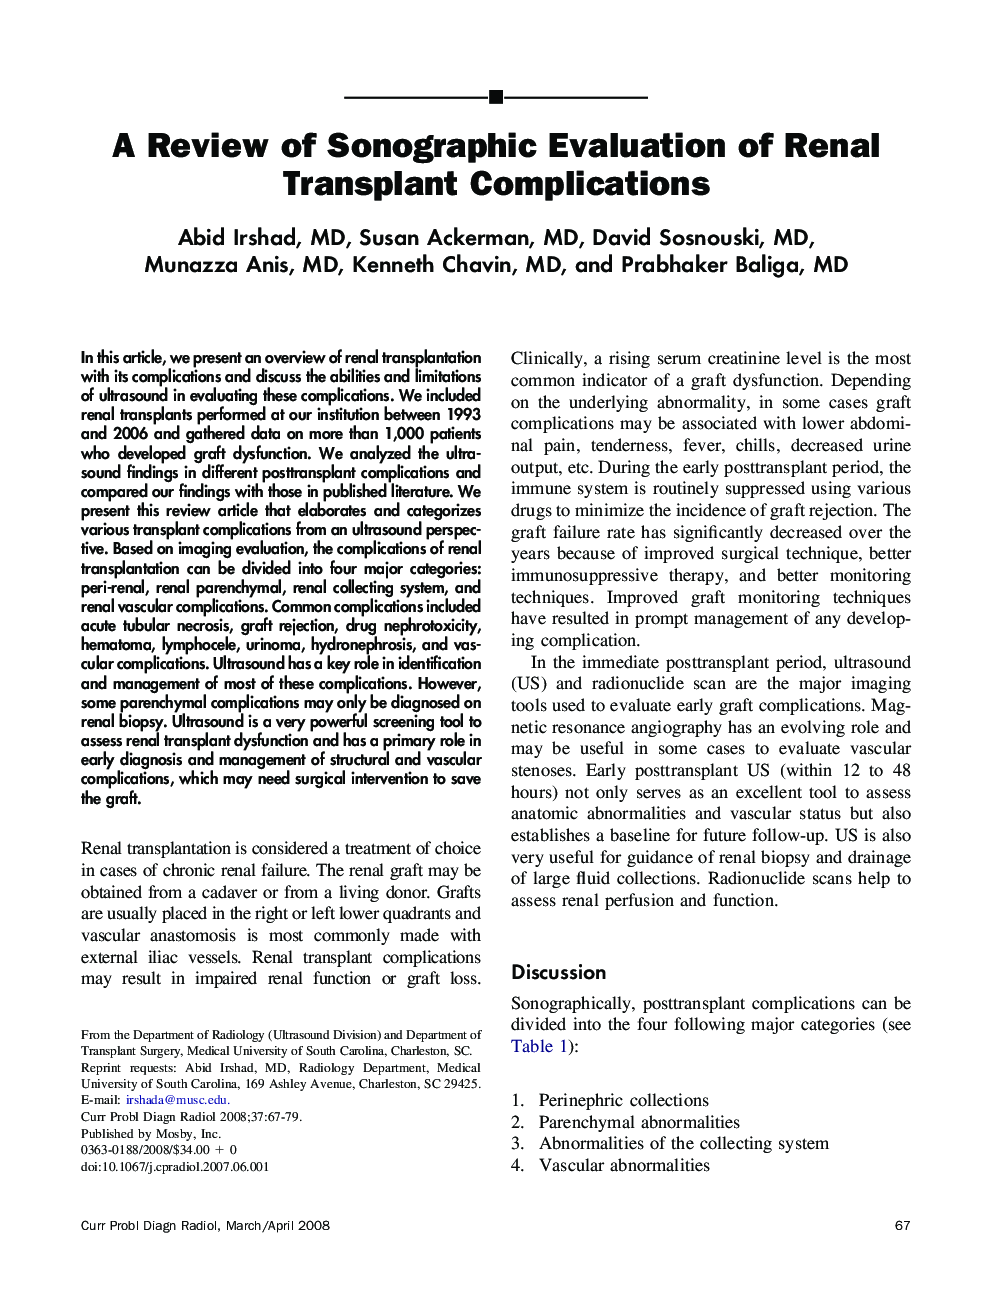 A Review of Sonographic Evaluation of Renal Transplant Complications